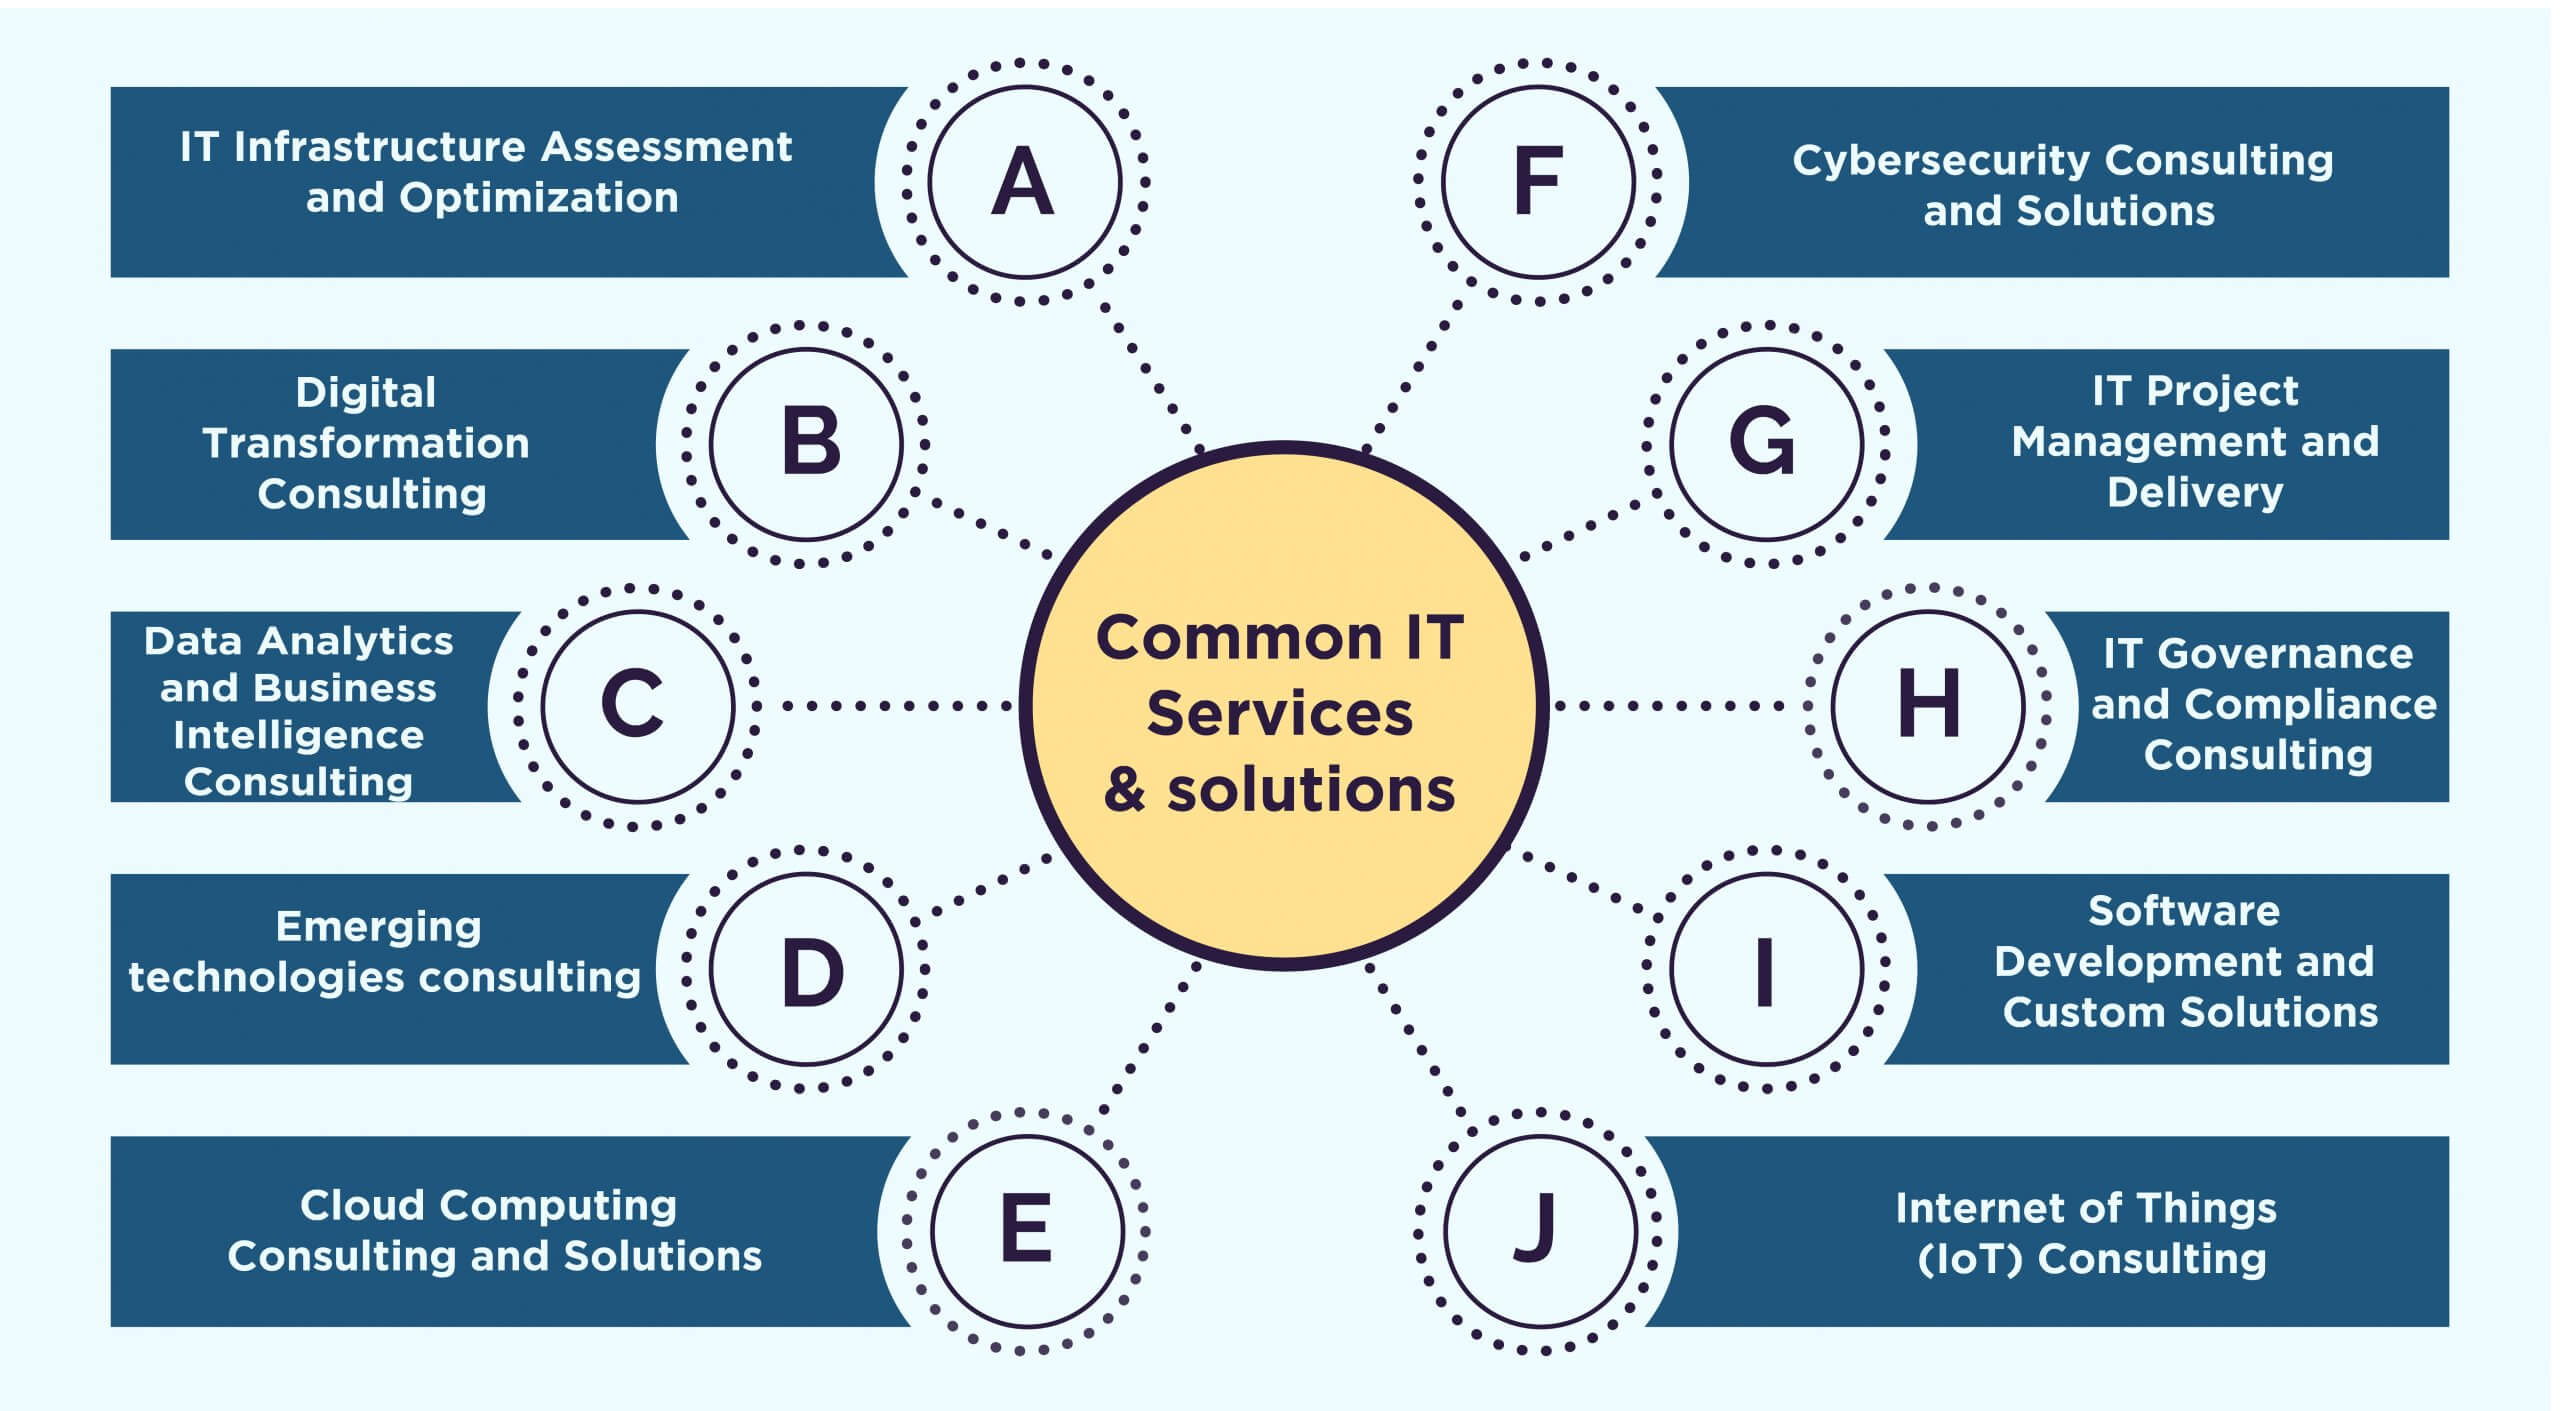 Types of IT Consulting Services and solutions available in the market